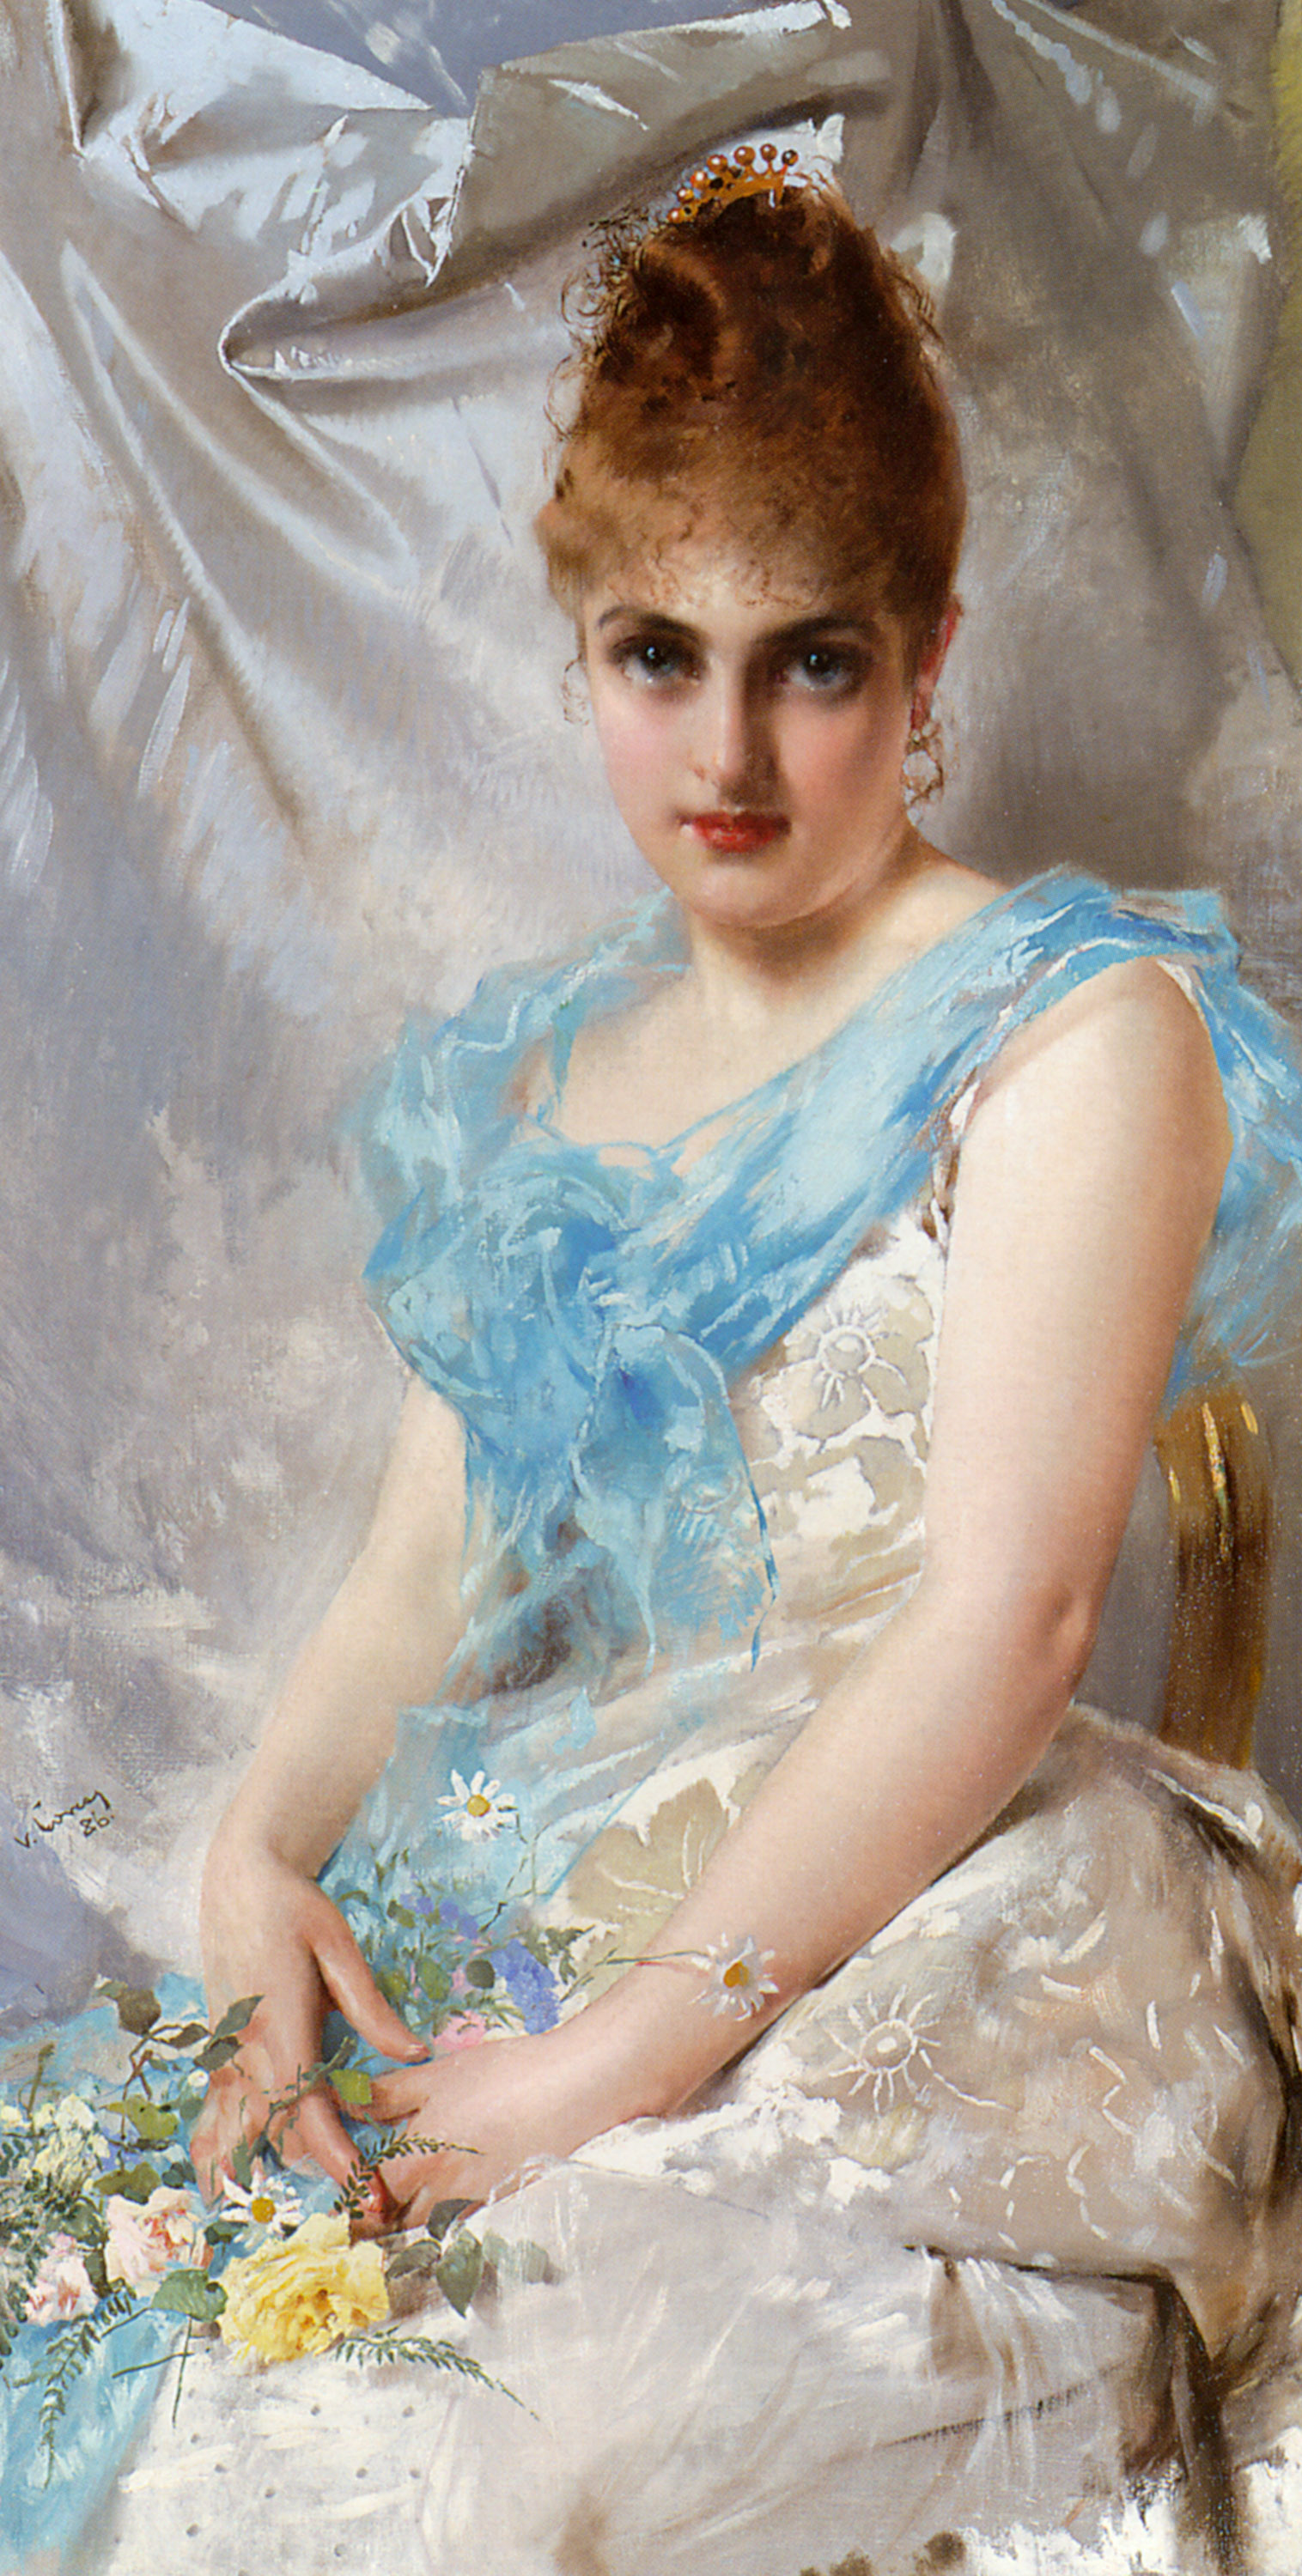 Corcos Vittorio Matteo A Spring Beauty 1886 Oil On Canvas